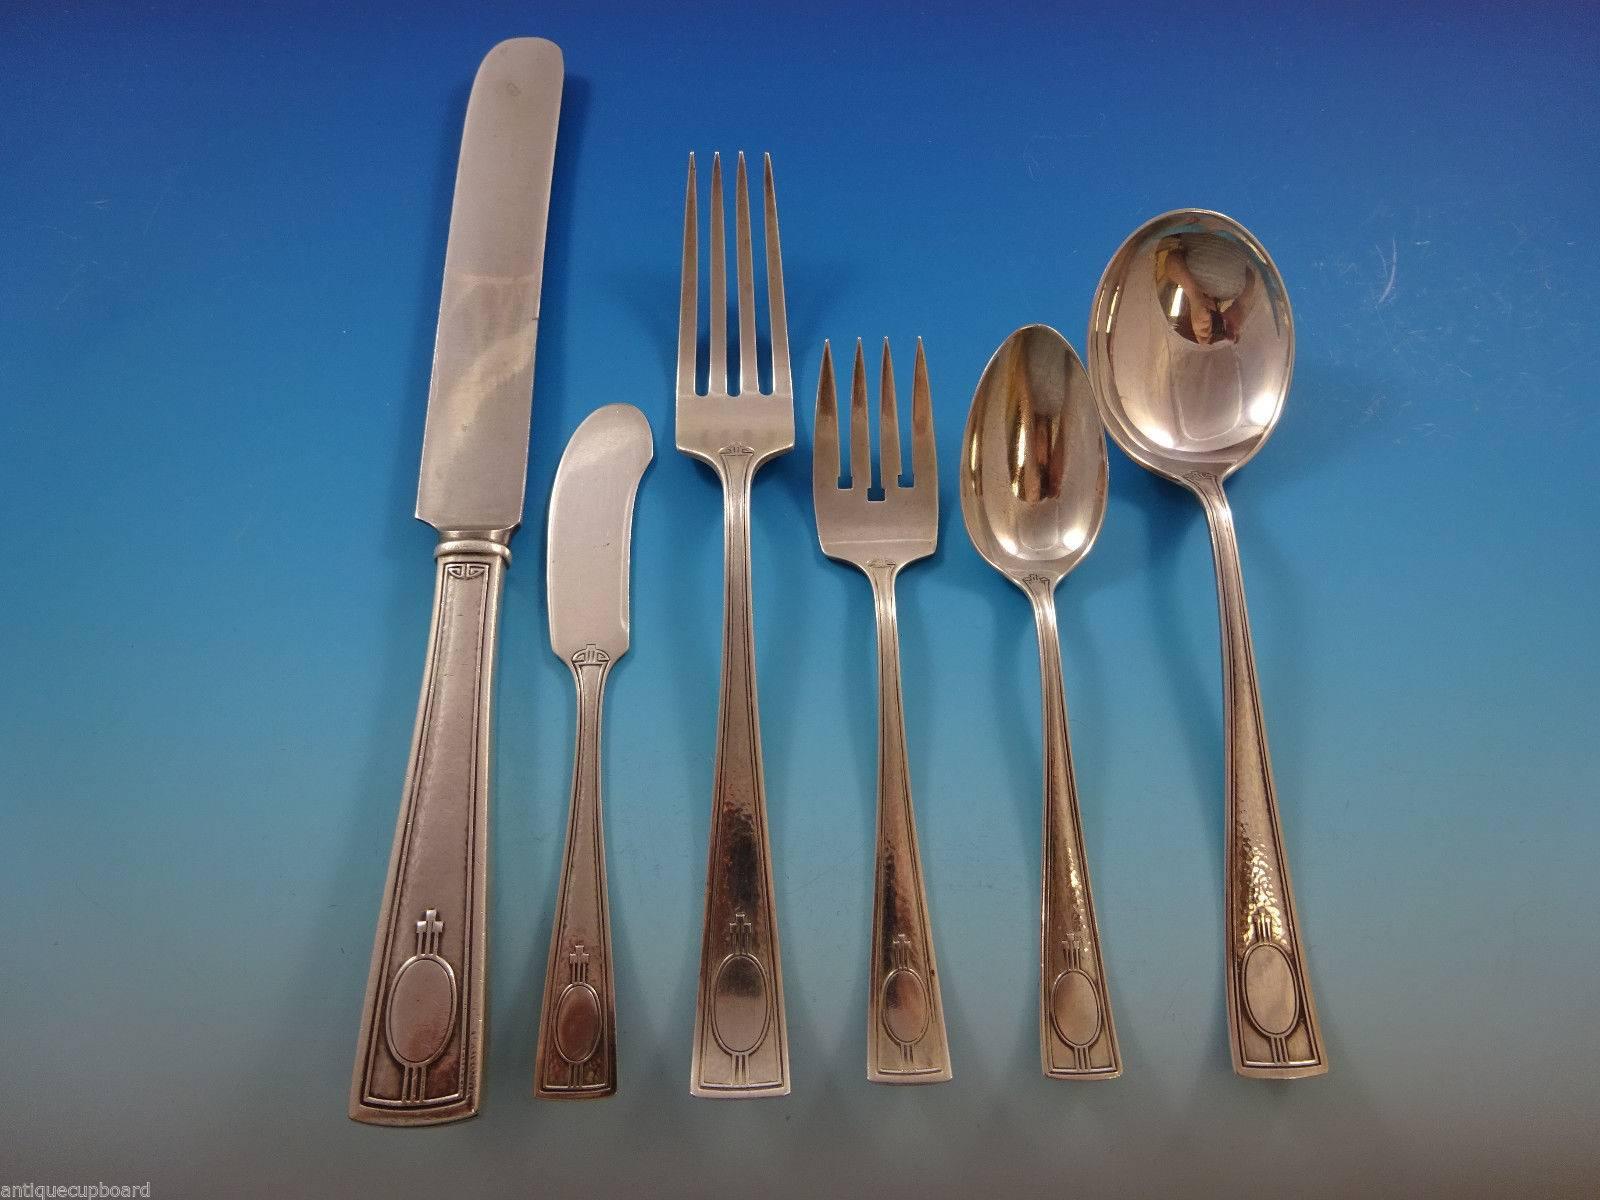 Arts & Crafts Carthage by Wallace Sterling silver dinner size flatware set of 58 pieces. This set includes:

Eight dinner size knives, 9 5/8